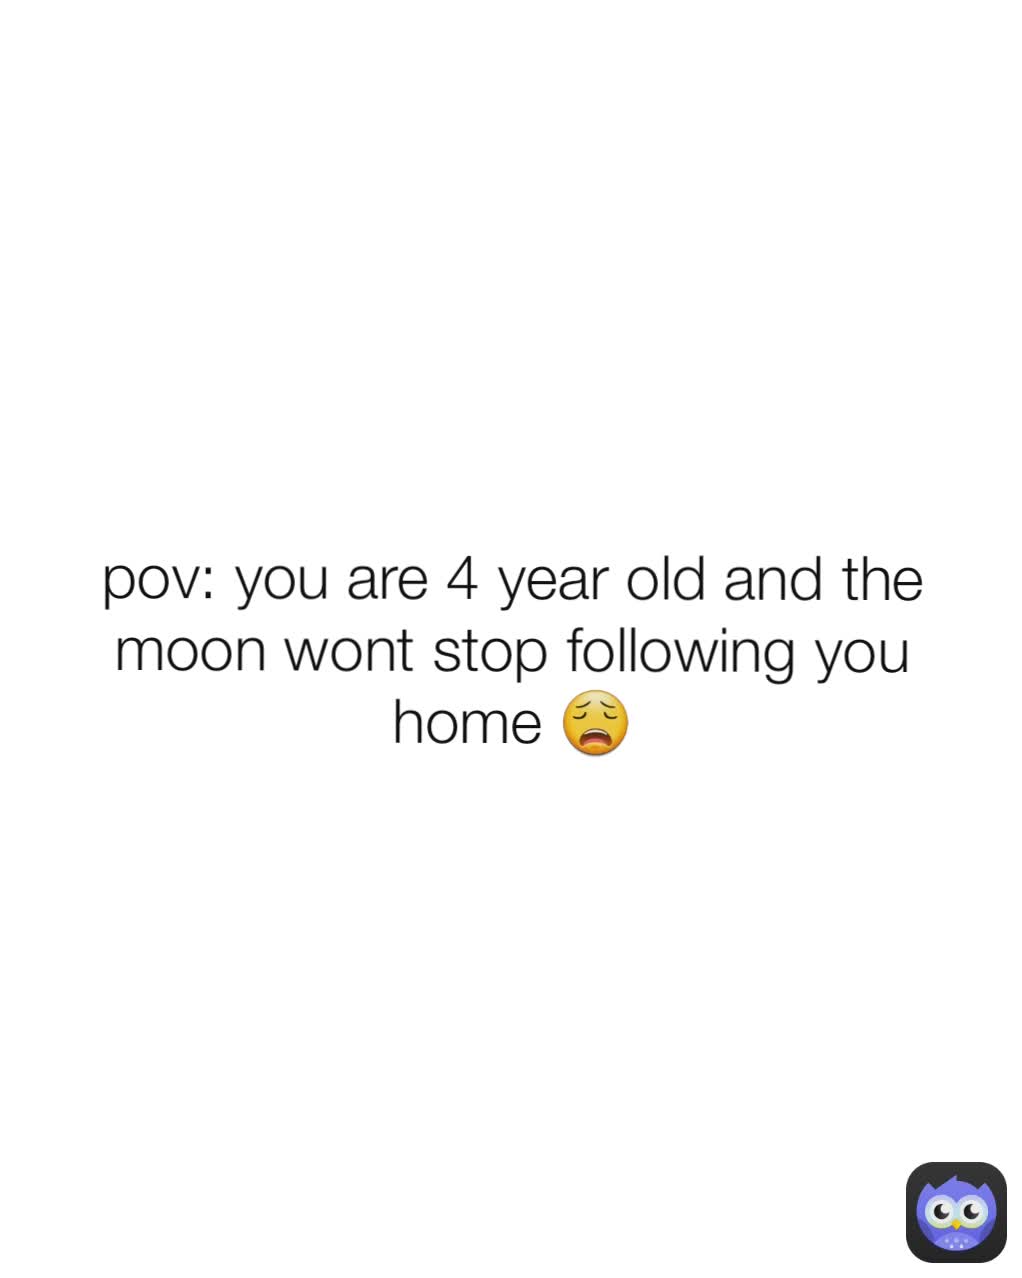 pov: you are 4 year old and the moon wont stop following you home 😩